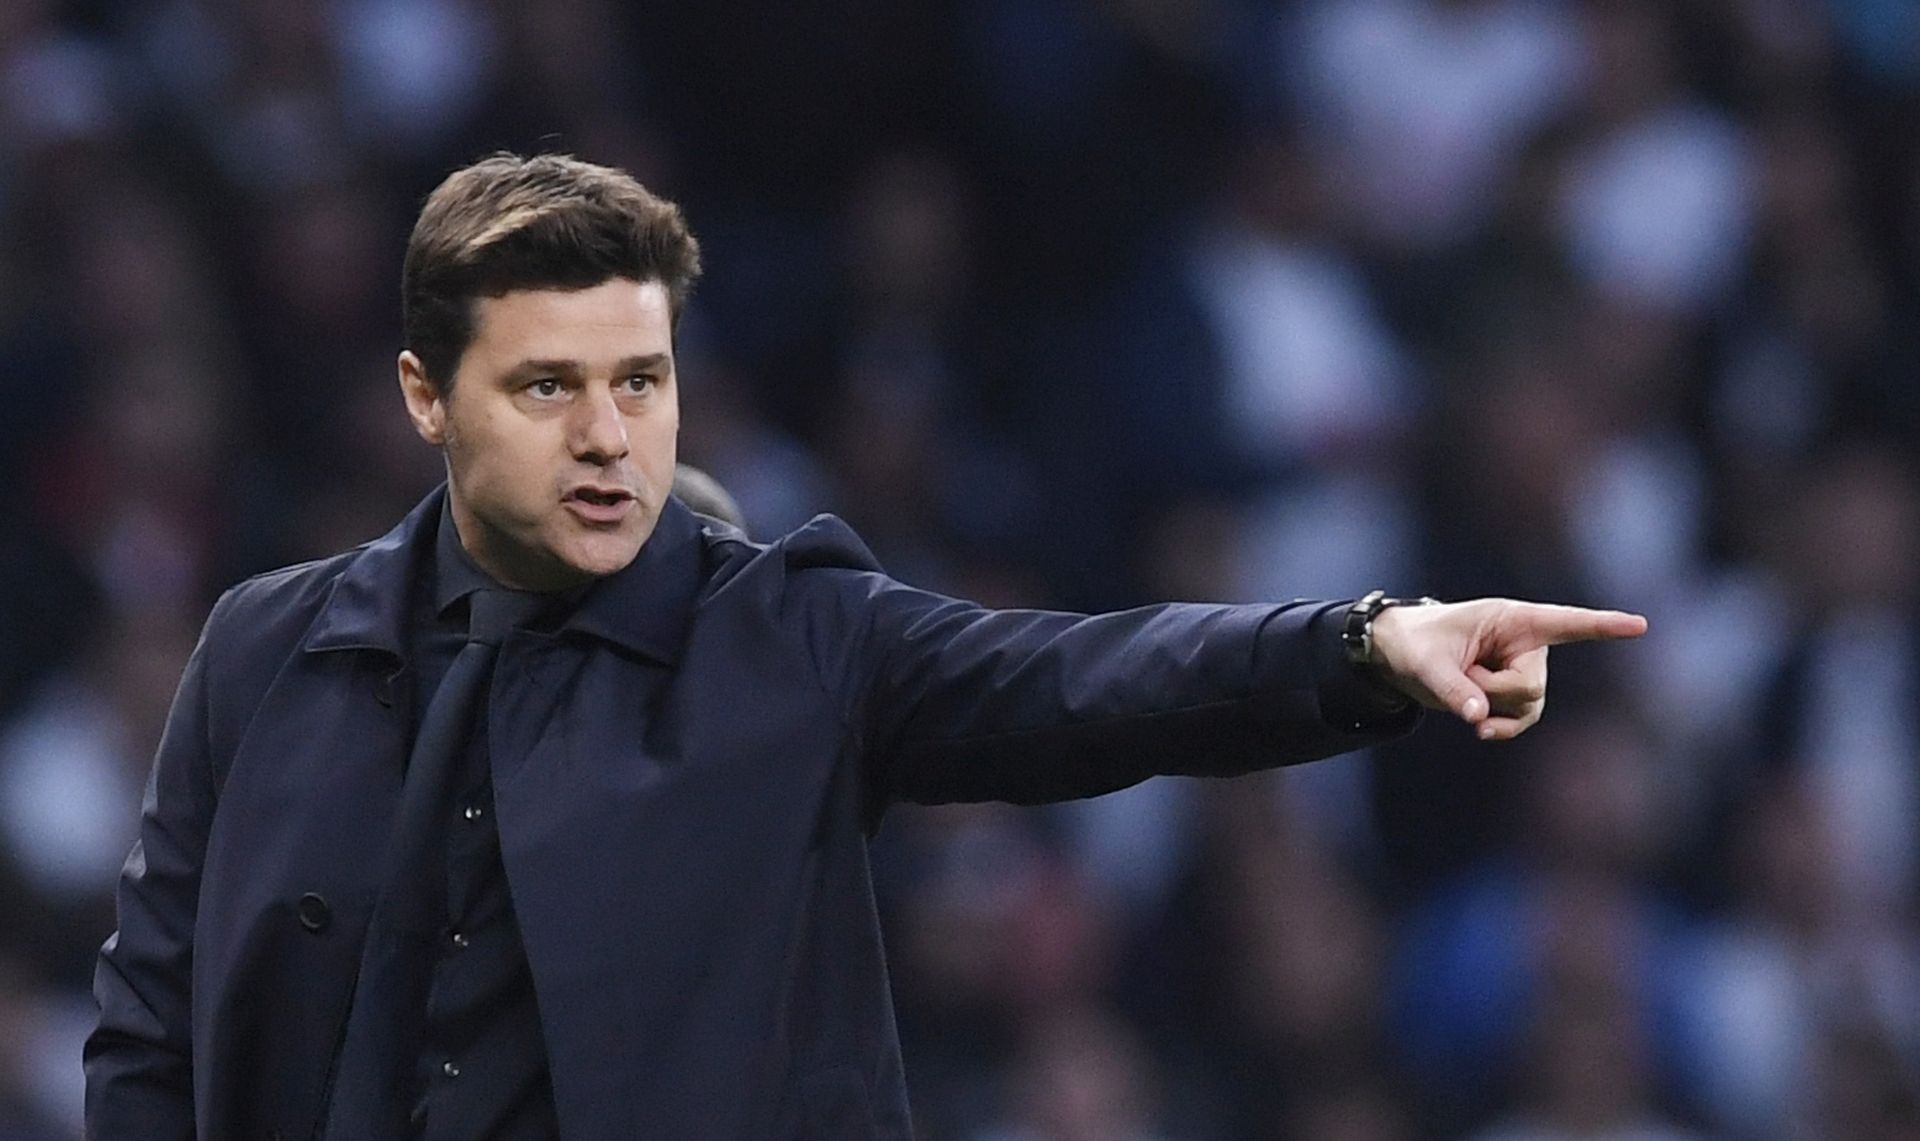 epa08010879 (FILE) - Tottenham Hotspur's manager Mauricio Pochettino reacts during the UEFA Champions League semi-final first leg soccer match between Tottenham Hotspur and Ajax Amsterdam at the Tottenham Hotspur Stadium in London, Britain, 30 April 2019 (re-issued 20 November 2019). Tottenham Hotspur has sacked Mauricio Pochettino according to a club statement on 19 November.  EPA/WILL OLIVER *** Local Caption *** 55159408